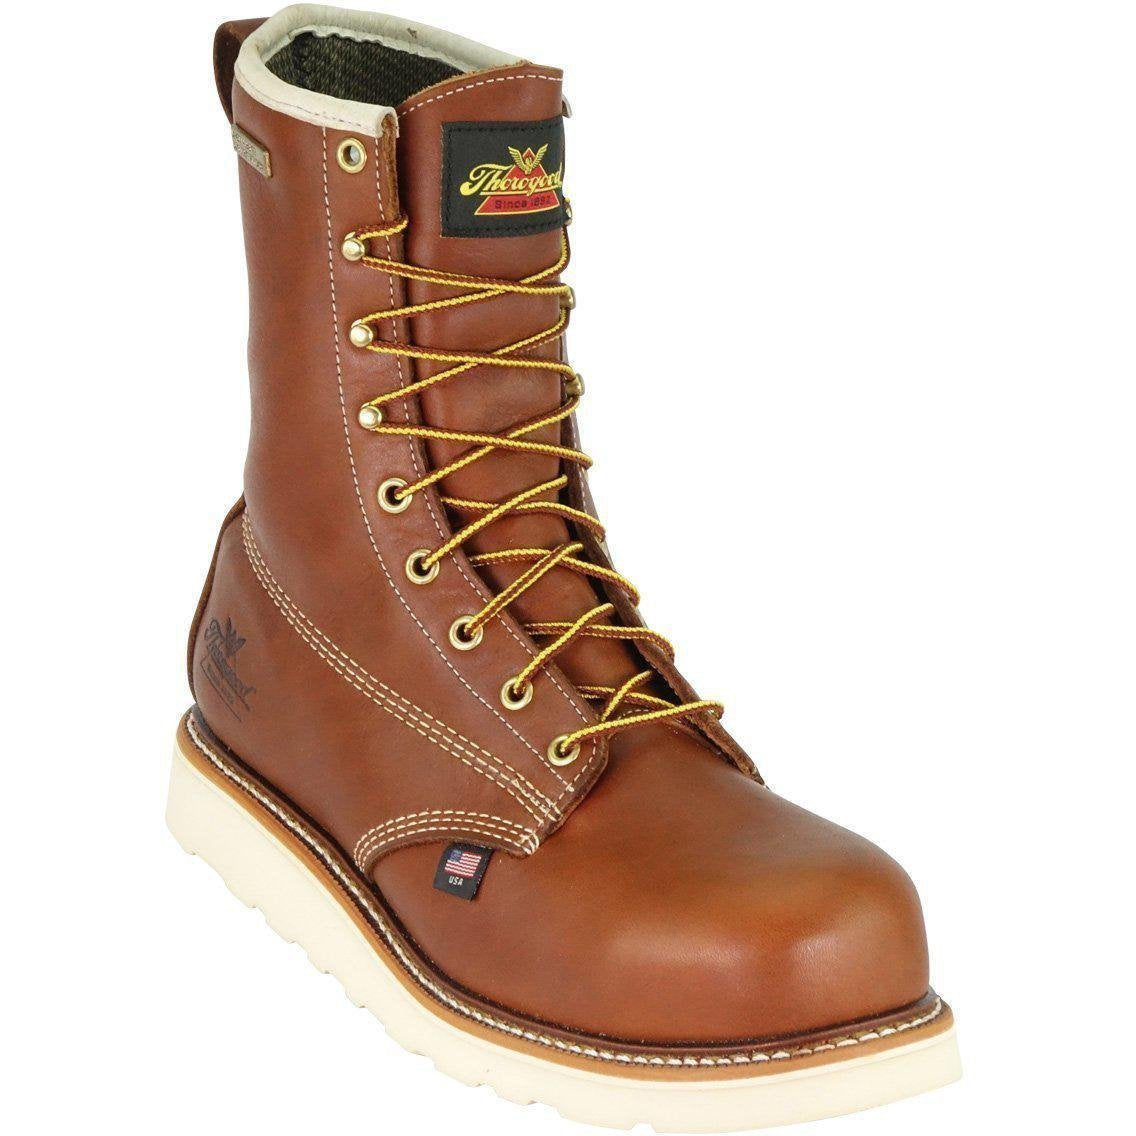 Thorogood Men's USA Made Amer Heritage 8" Comp Toe Wedge Work Boot 804-4210  - Overlook Boots